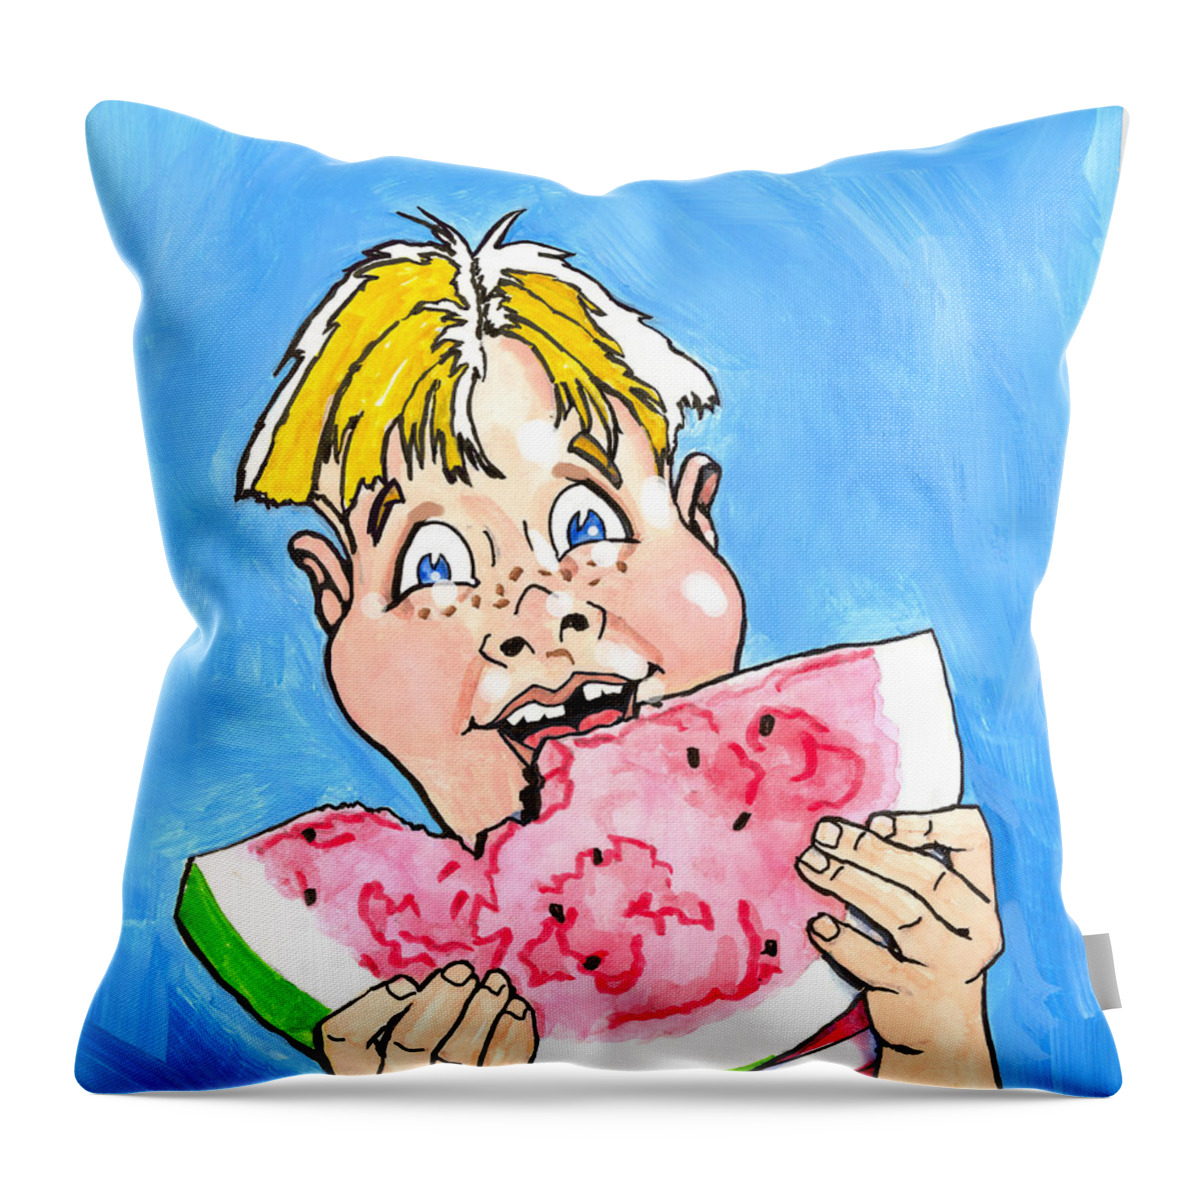 Boy Throw Pillow featuring the painting Watermelon Man by Richard De Wolfe